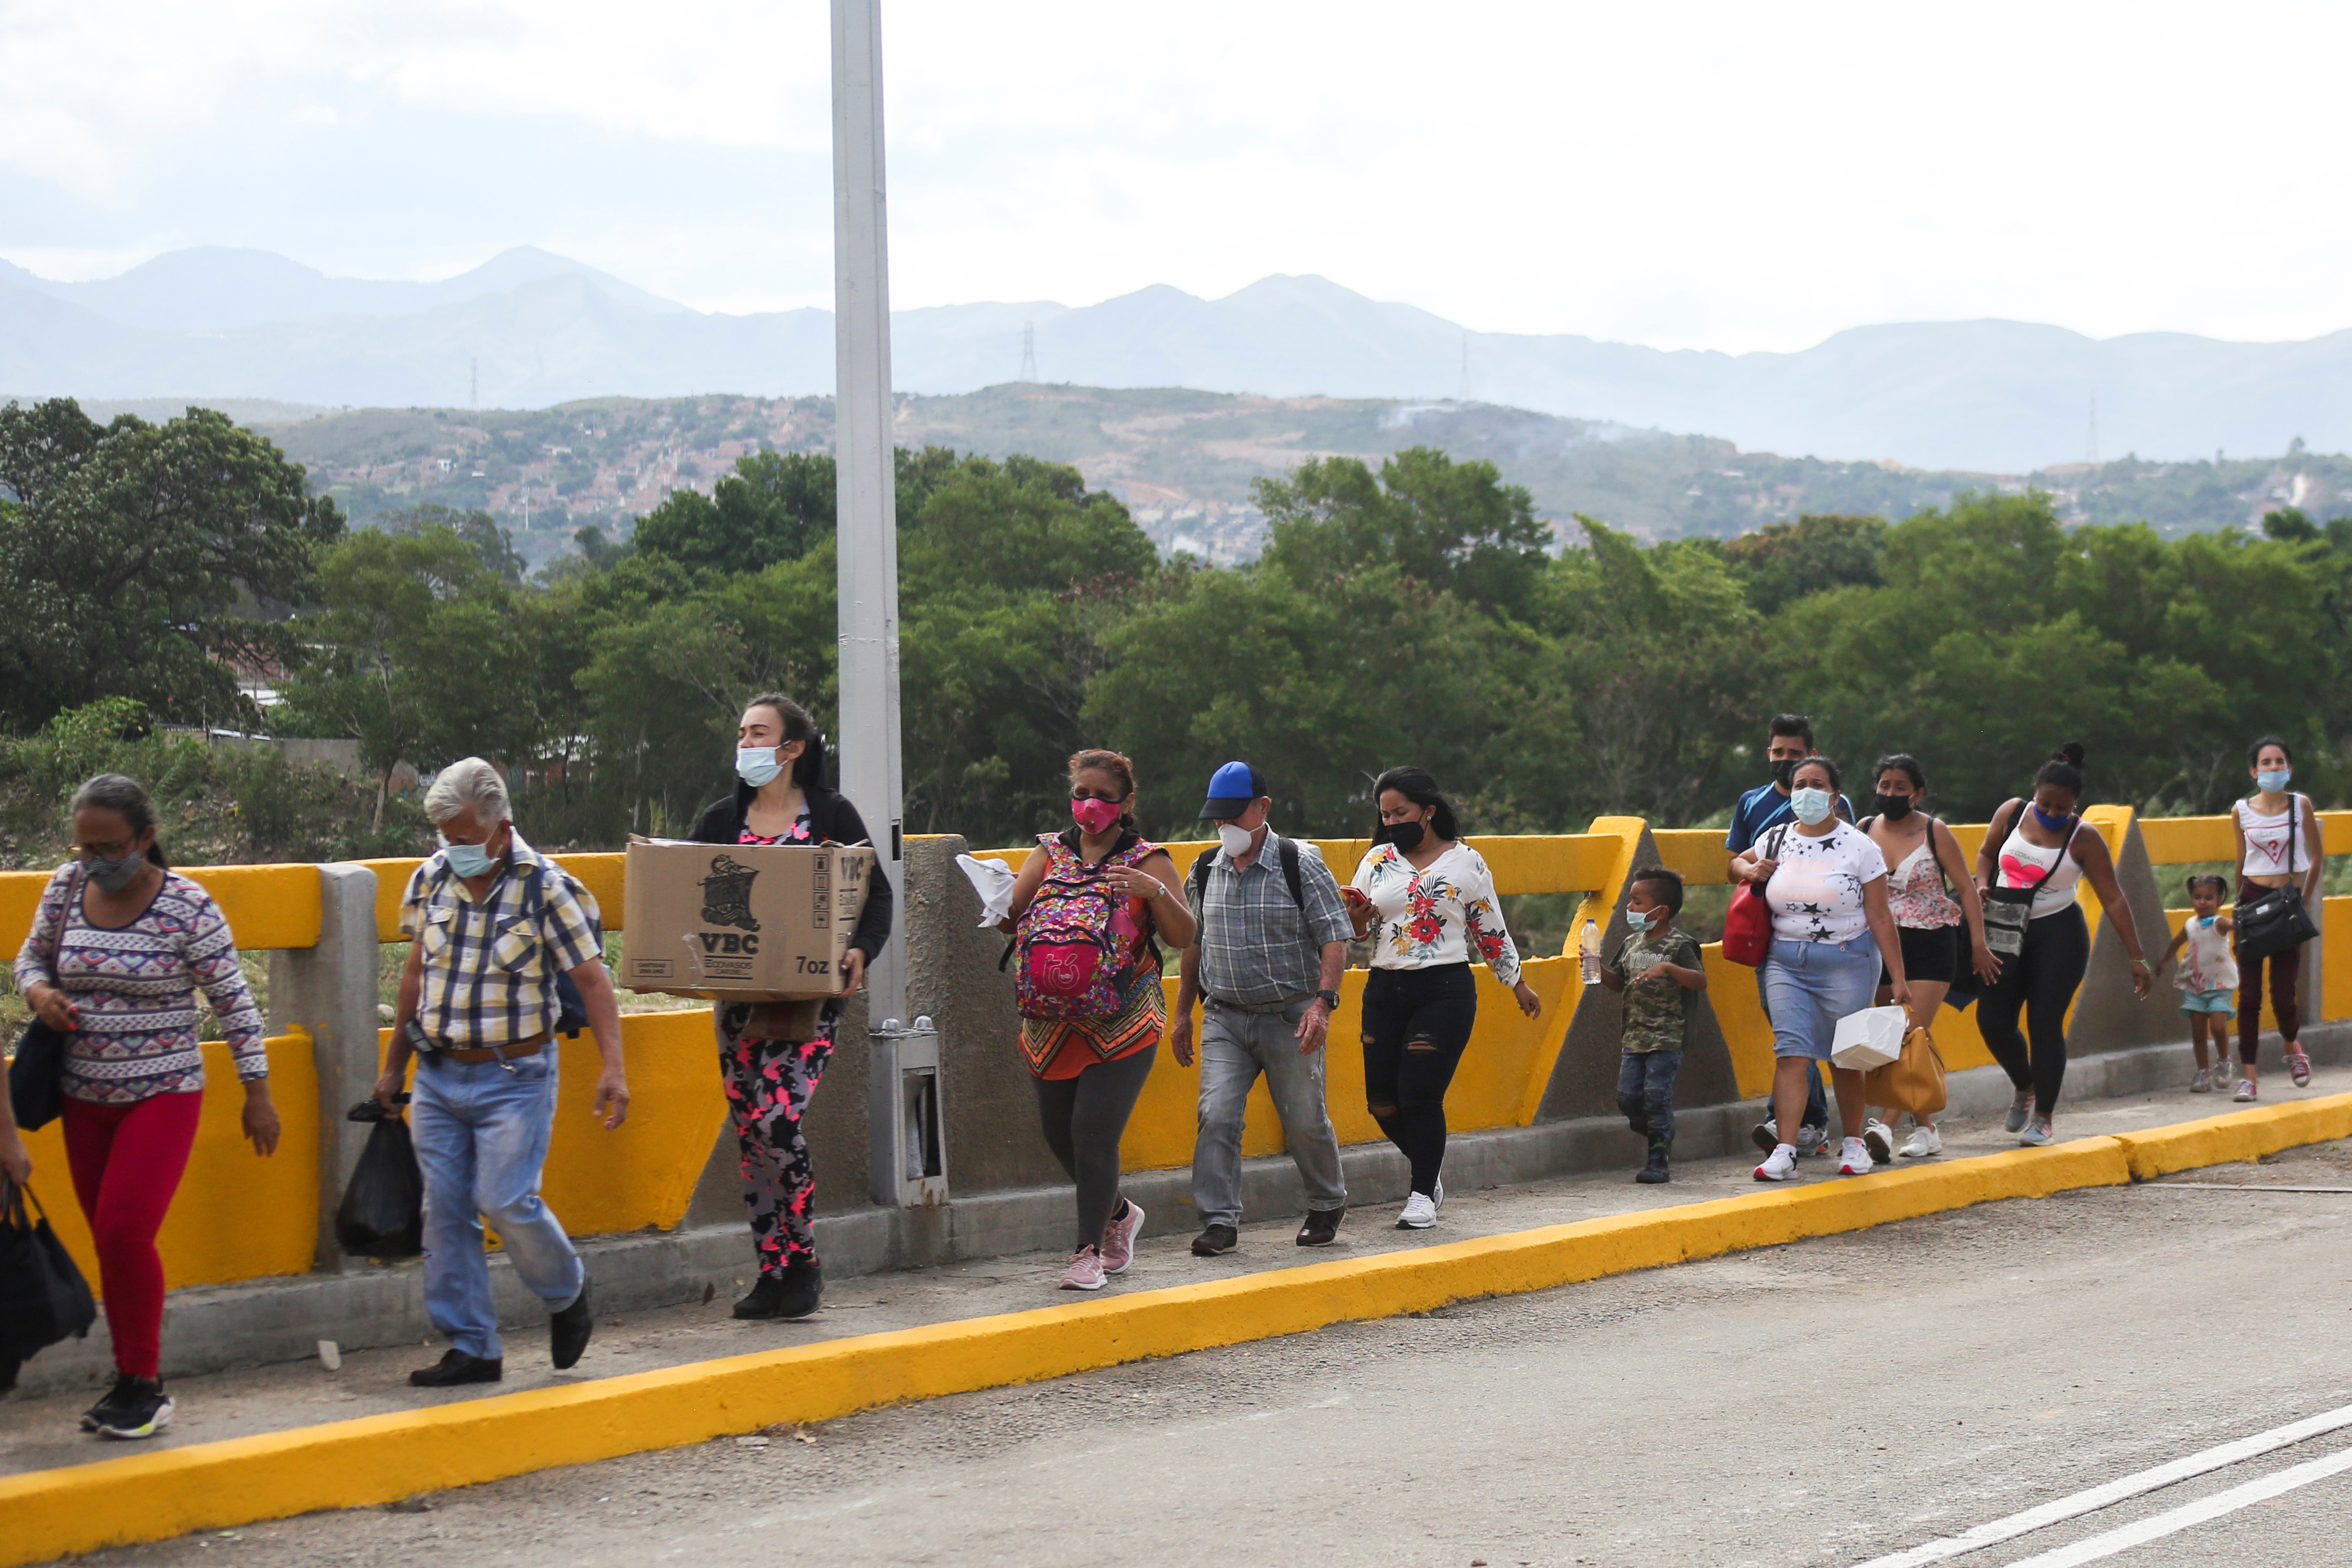 People, permitted for humanitarian reasons, cross the Simon Bolivar International bridge from Cucuta, Colombia, after it was reopened, as seen from in San Antonio del Tachira, Venezuela October 4, 2021. REUTERS/Carlos Eduardo Ramirez